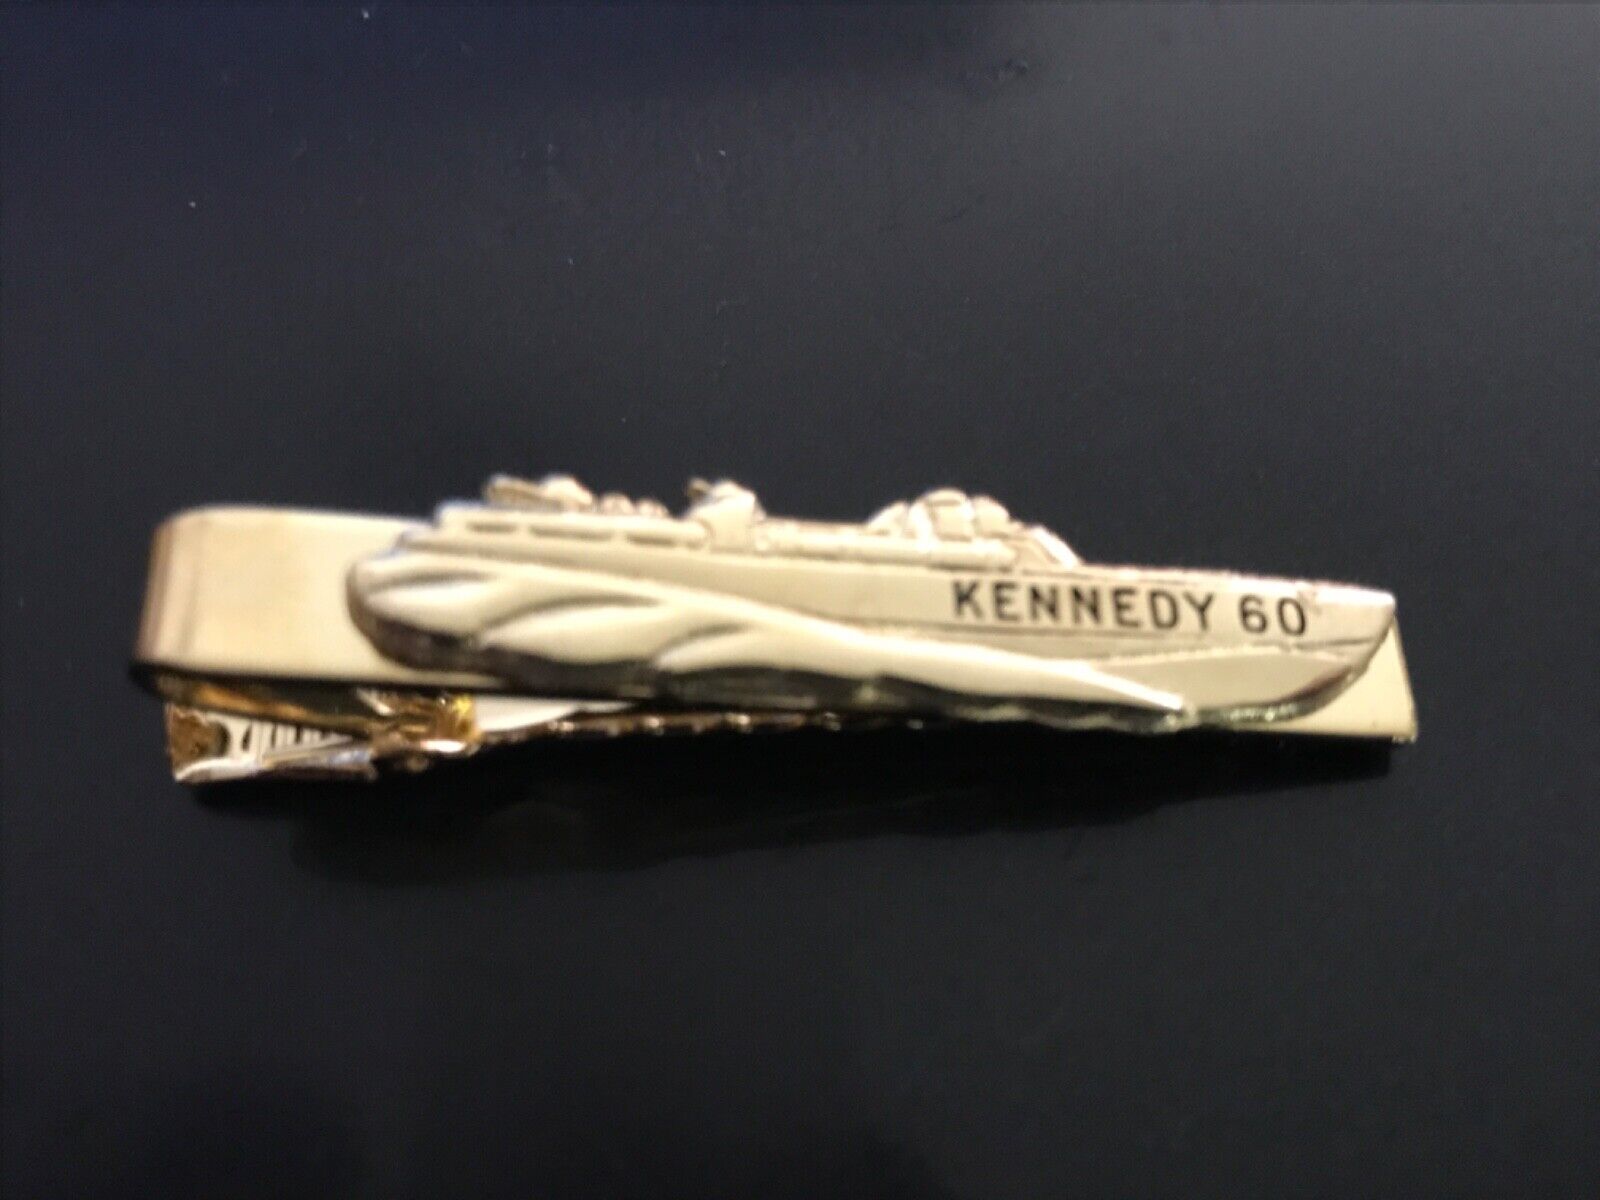  John F. Kennedy PT-109 Boat Gold Tie Clip Political Campaign 1960 Election